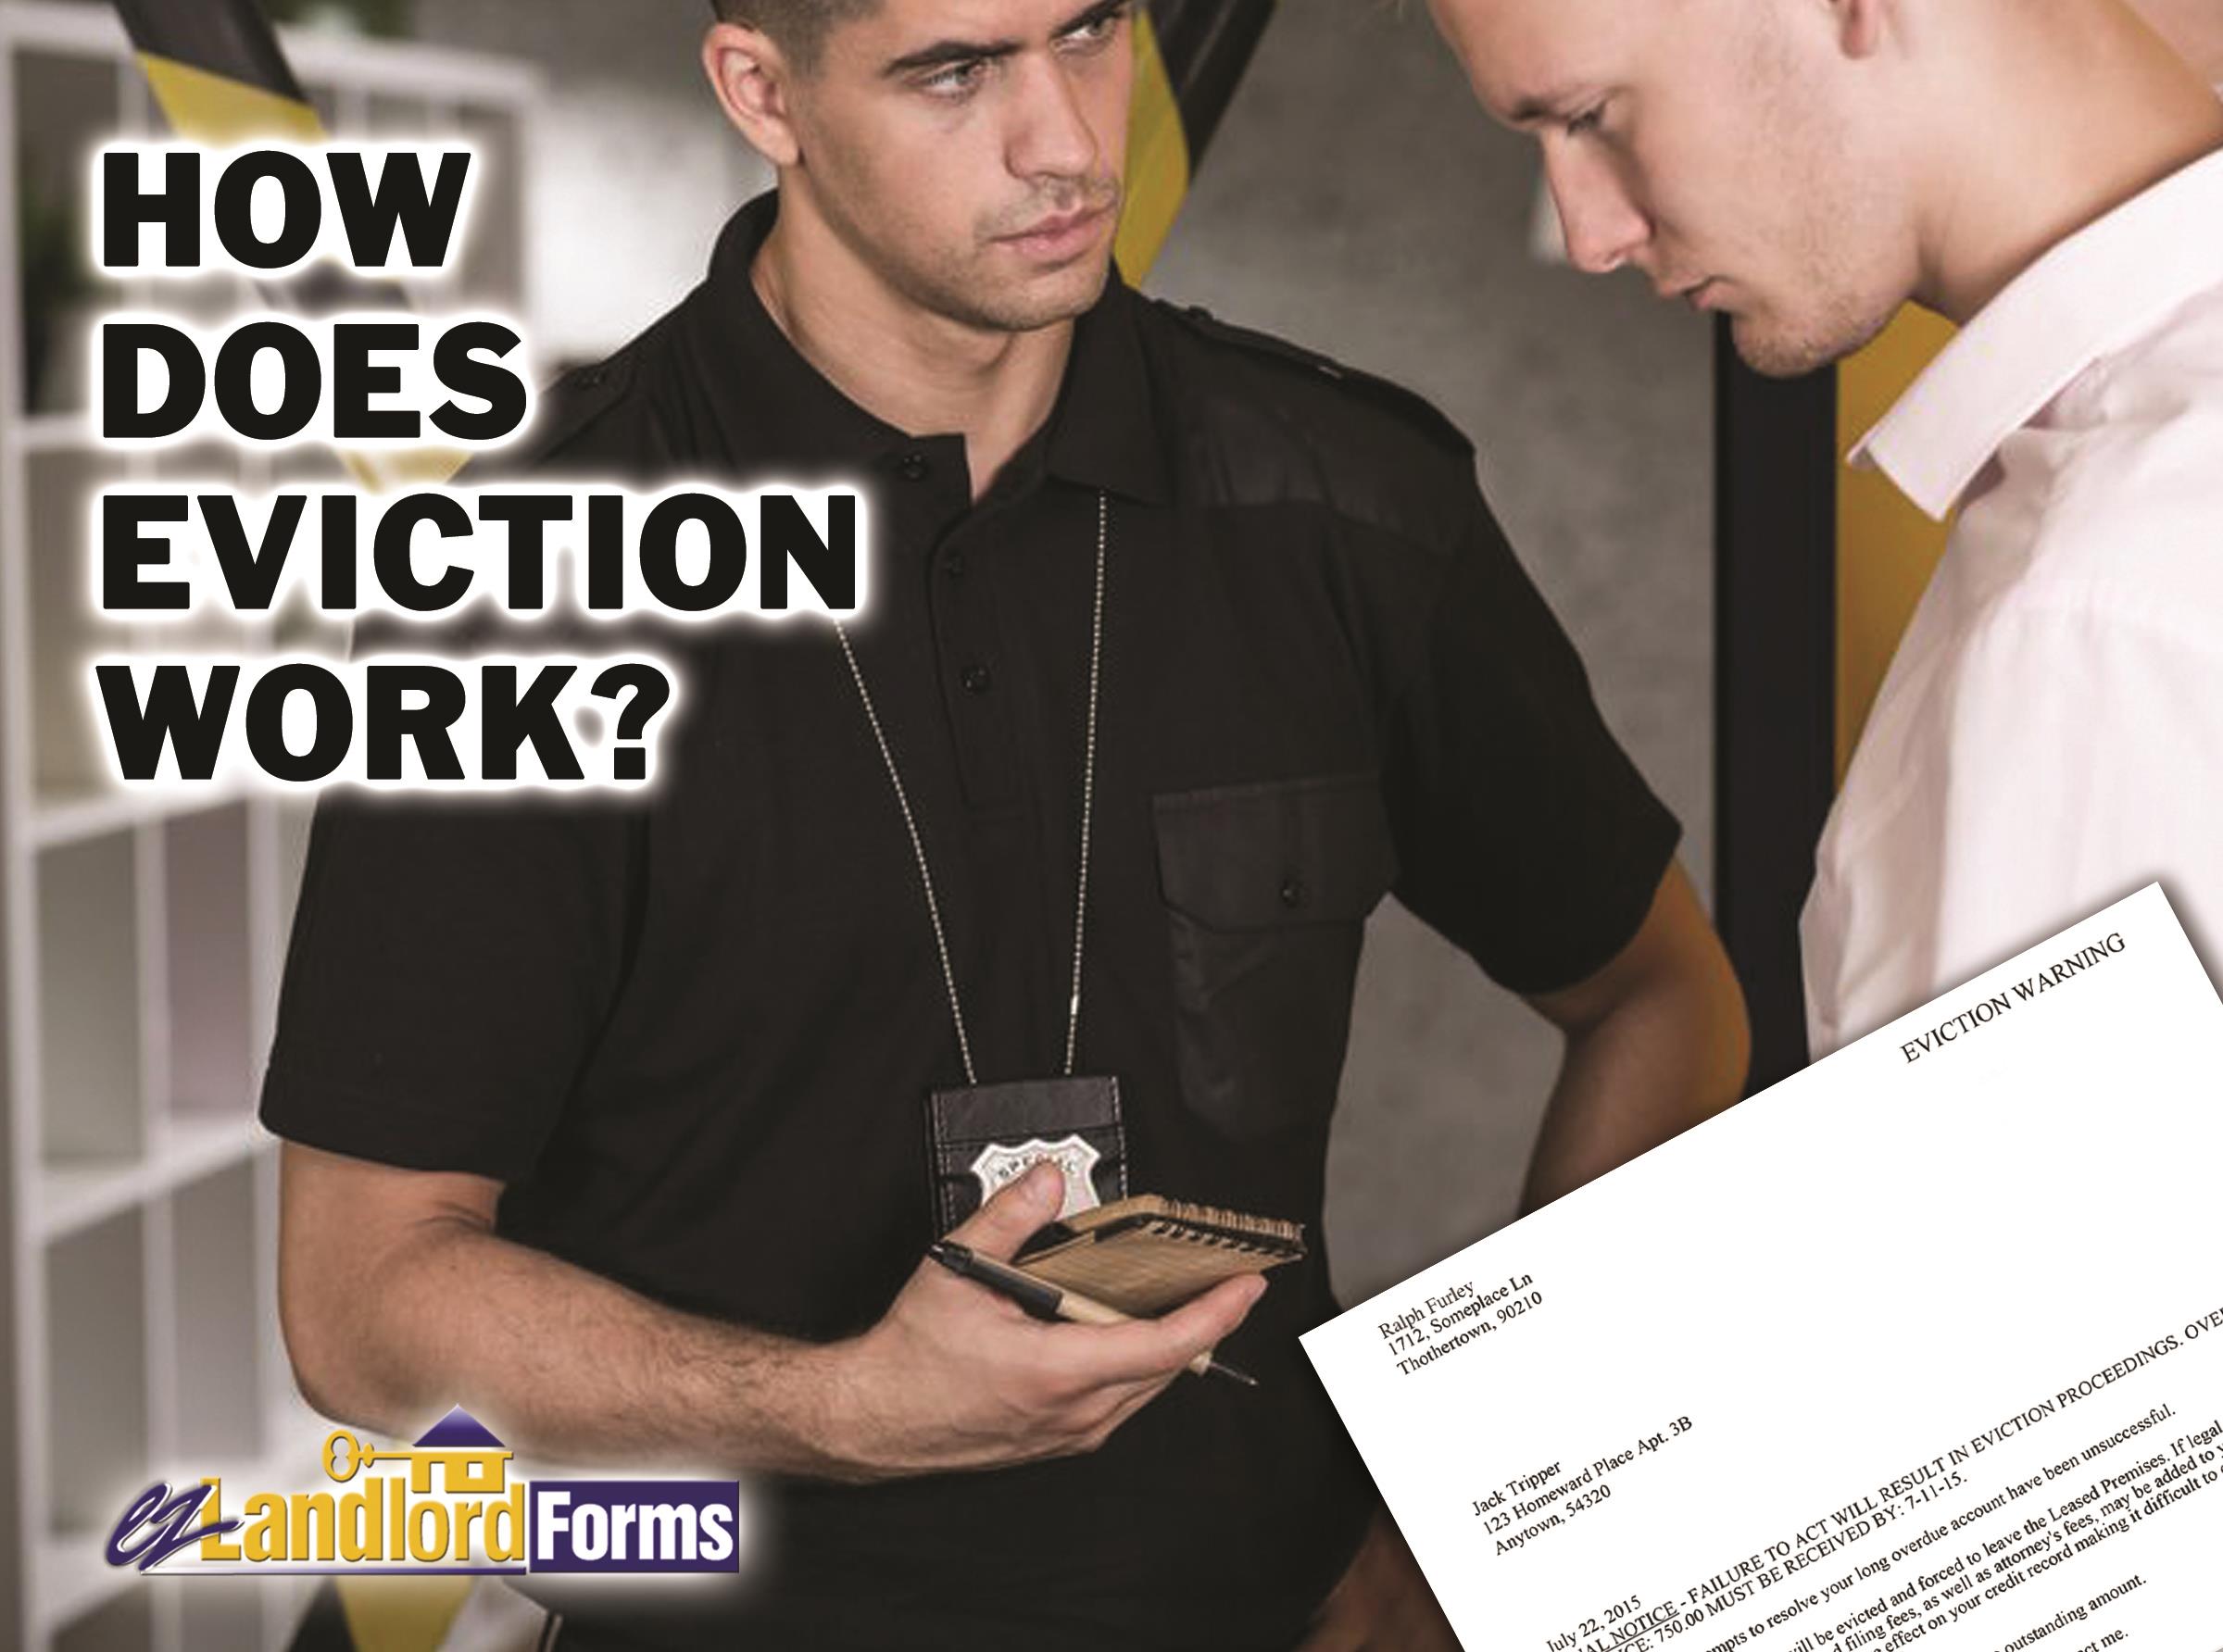 How Does Eviction Work? | EZ Landlord Forms